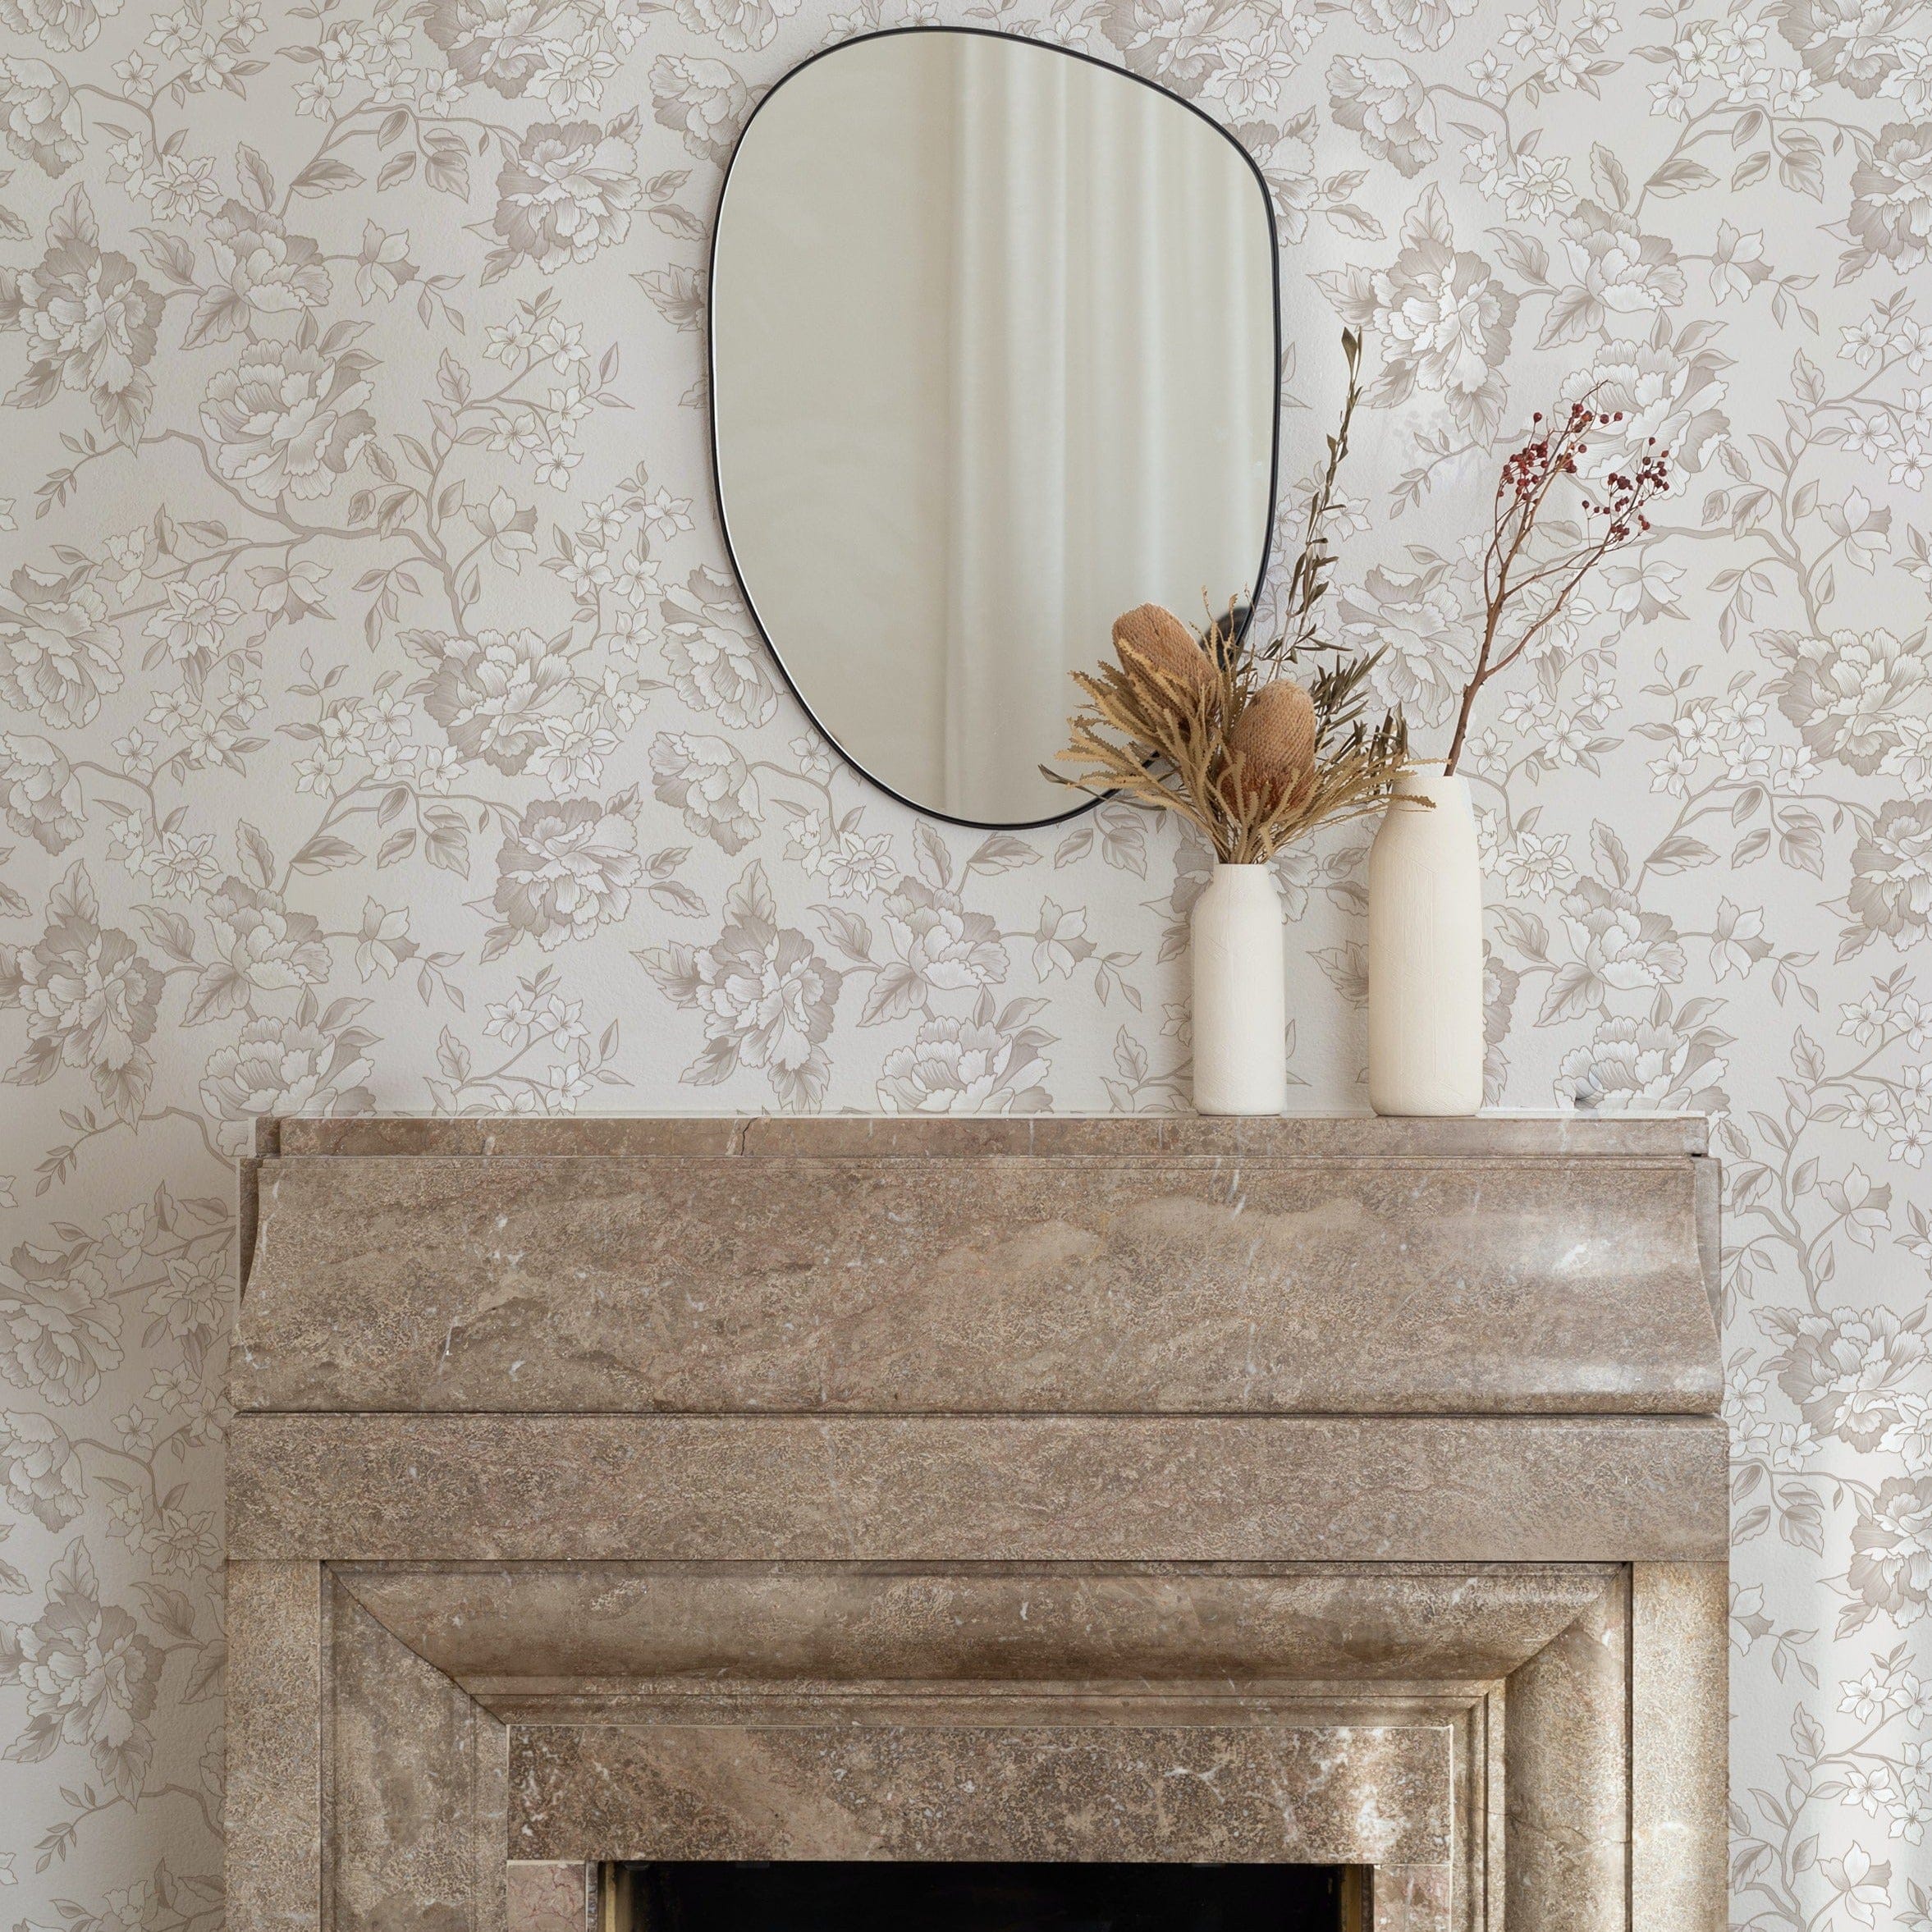 An elegant living room corner with the Ornamental Garden Wallpaper enhancing the wall behind a marble fireplace. The wallpaper's intricate floral pattern adds a luxurious touch, complemented by decorative vases and dried flowers atop the mantelpiece, under a simple round mirror.